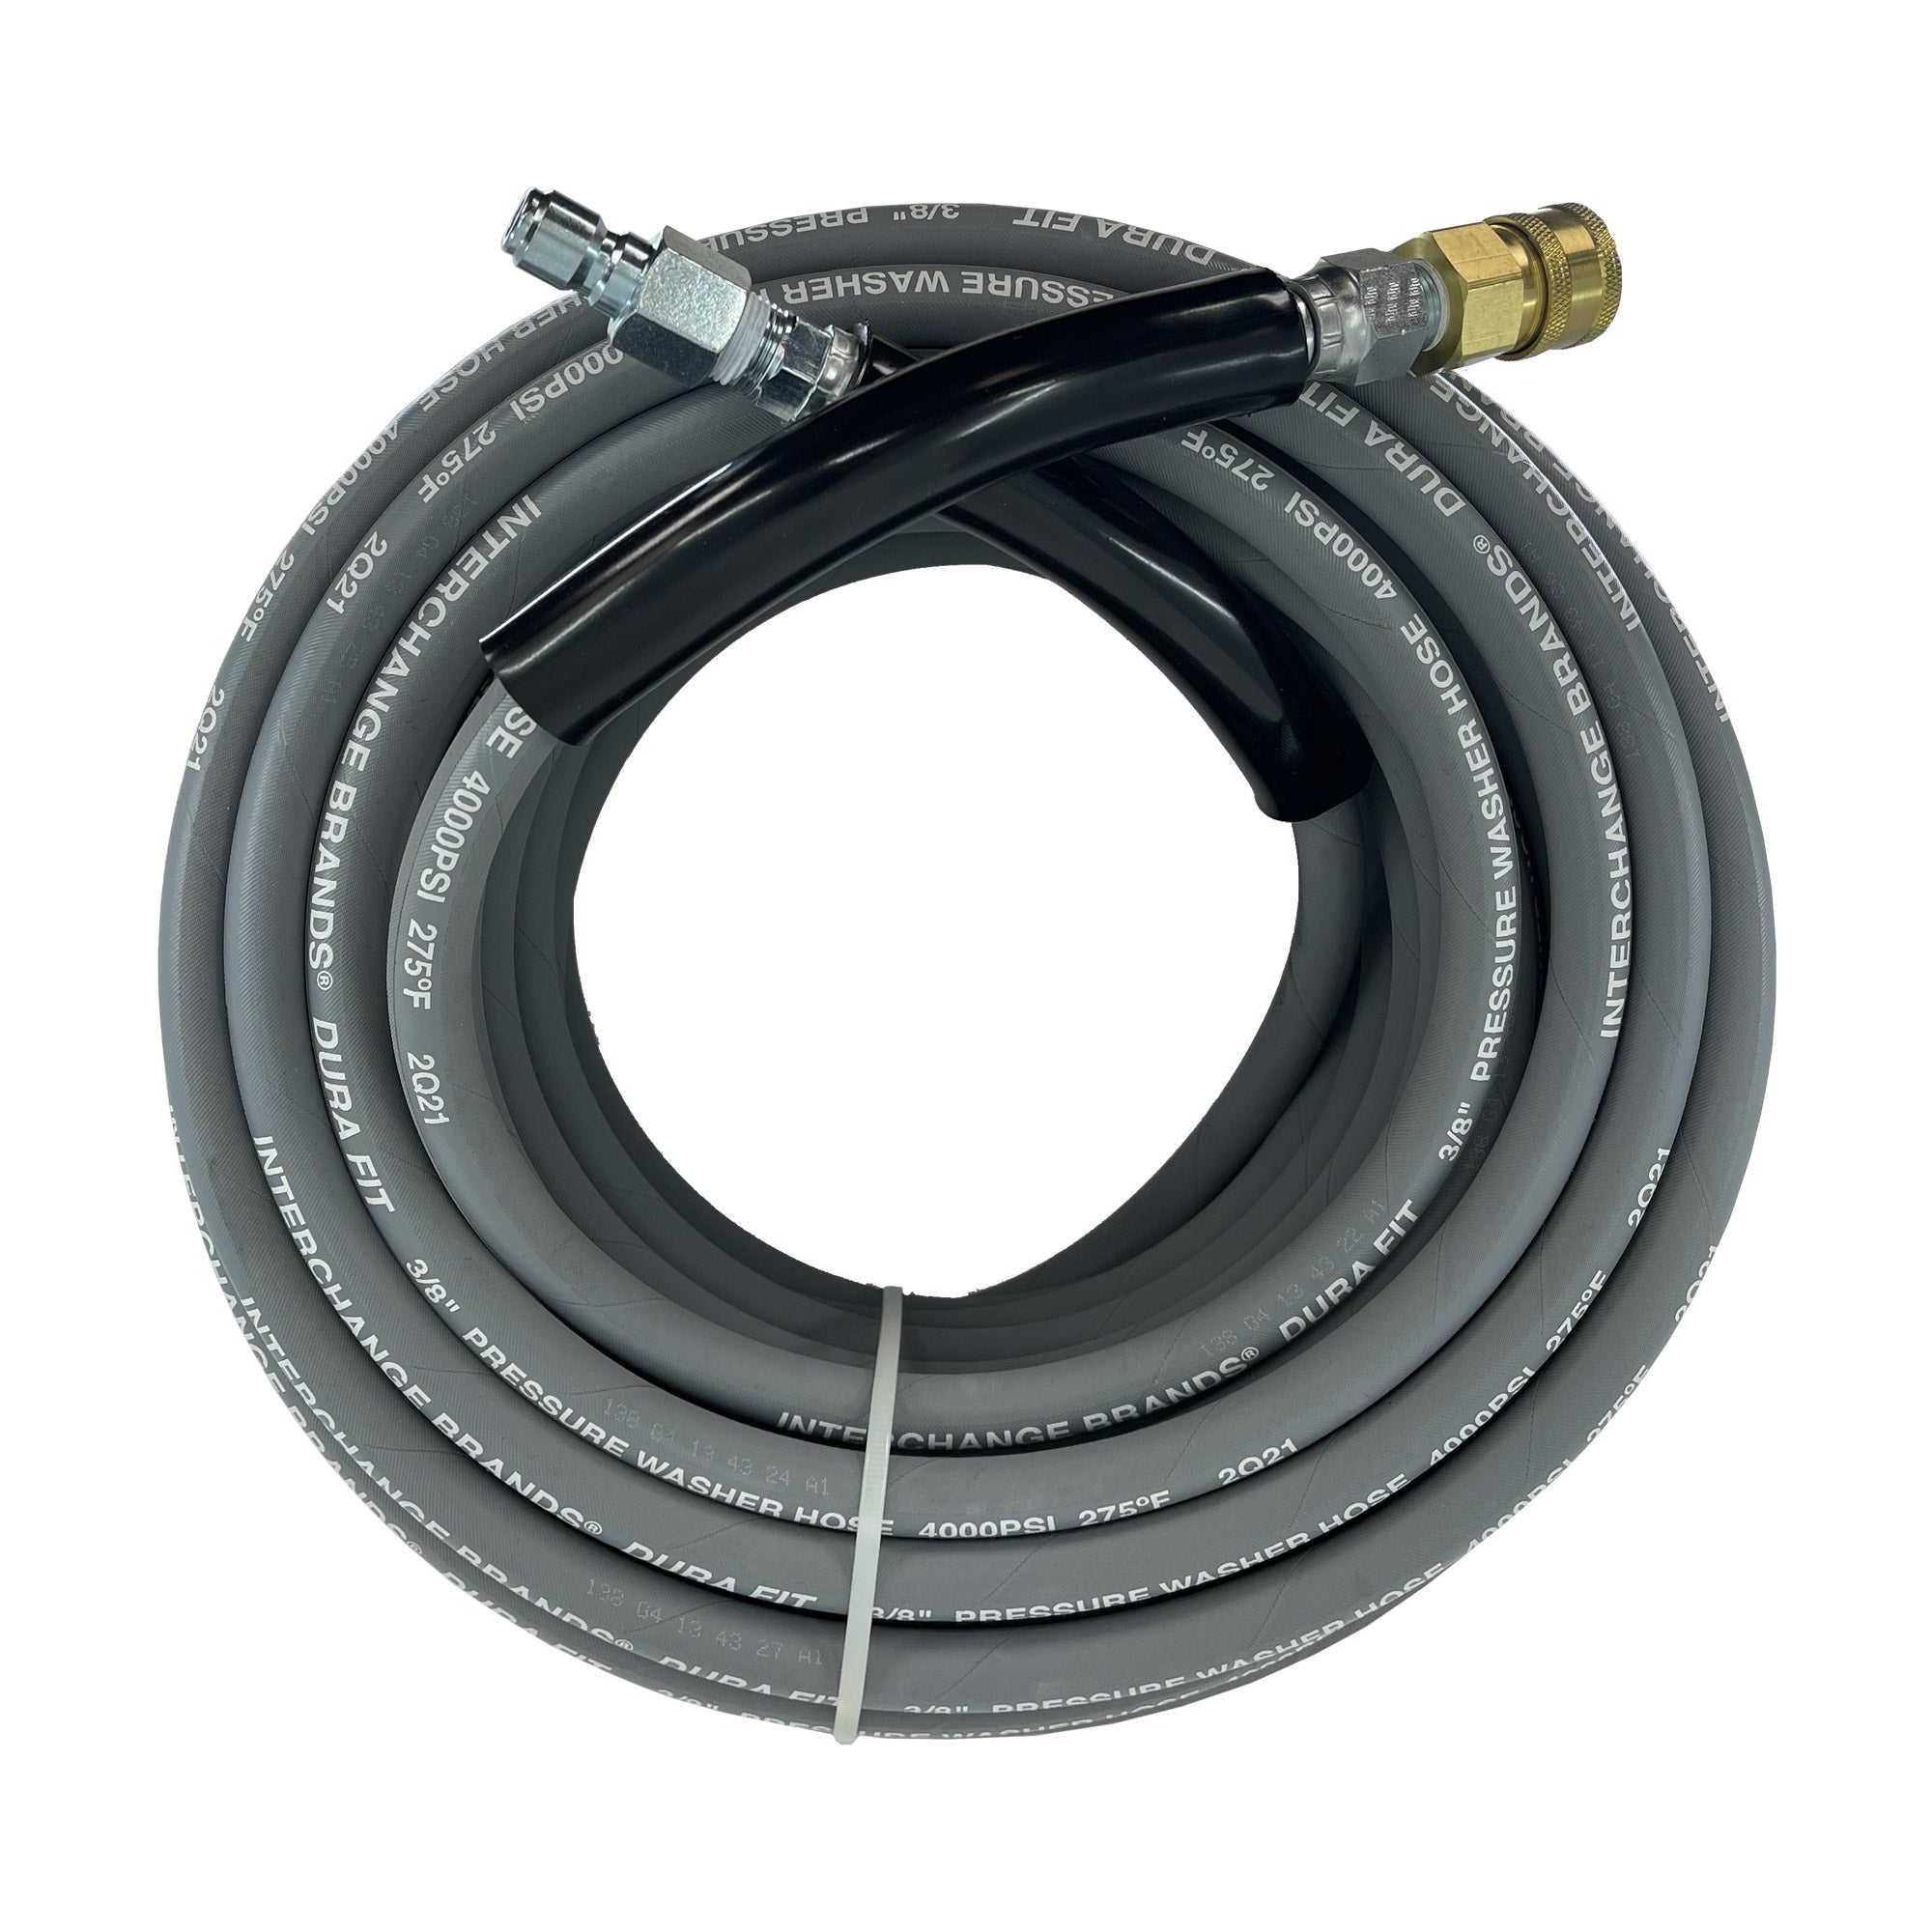 3/8" x 100' 4000 PSI Gray Non-Marking Pressure Washer Hose w/ Quick Connects